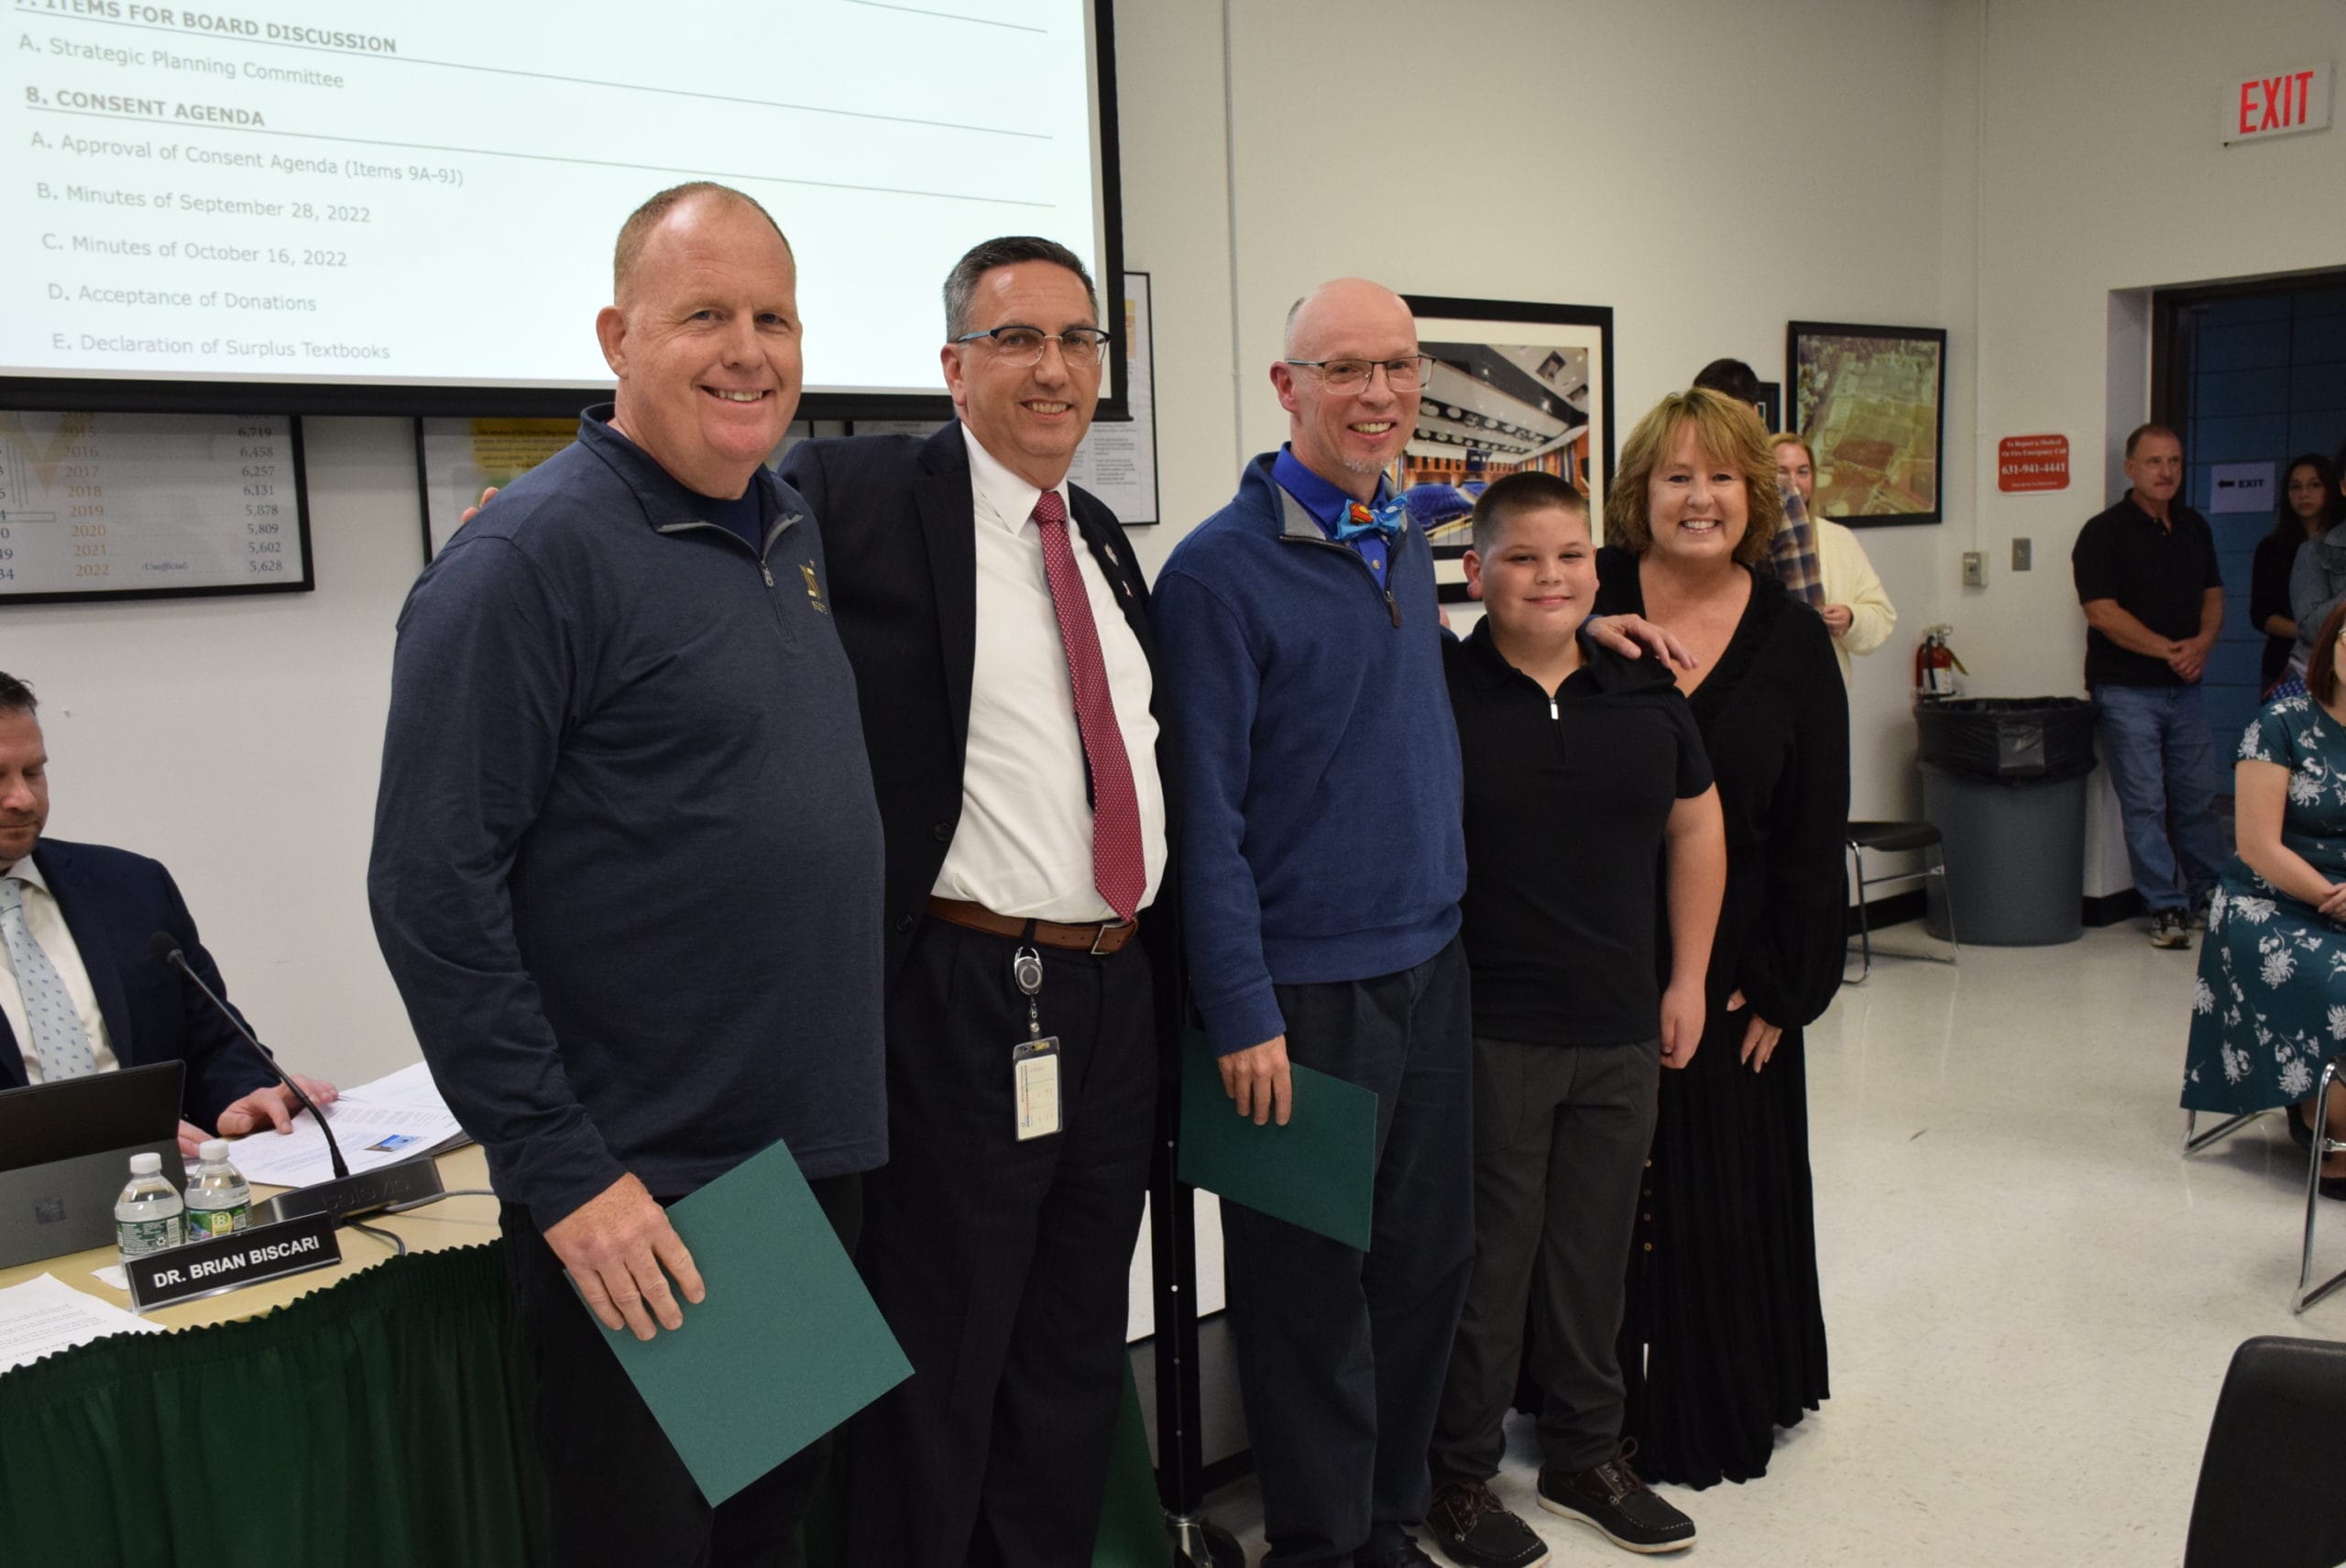 Students And Staff Recognized By Three Village Board Of Education